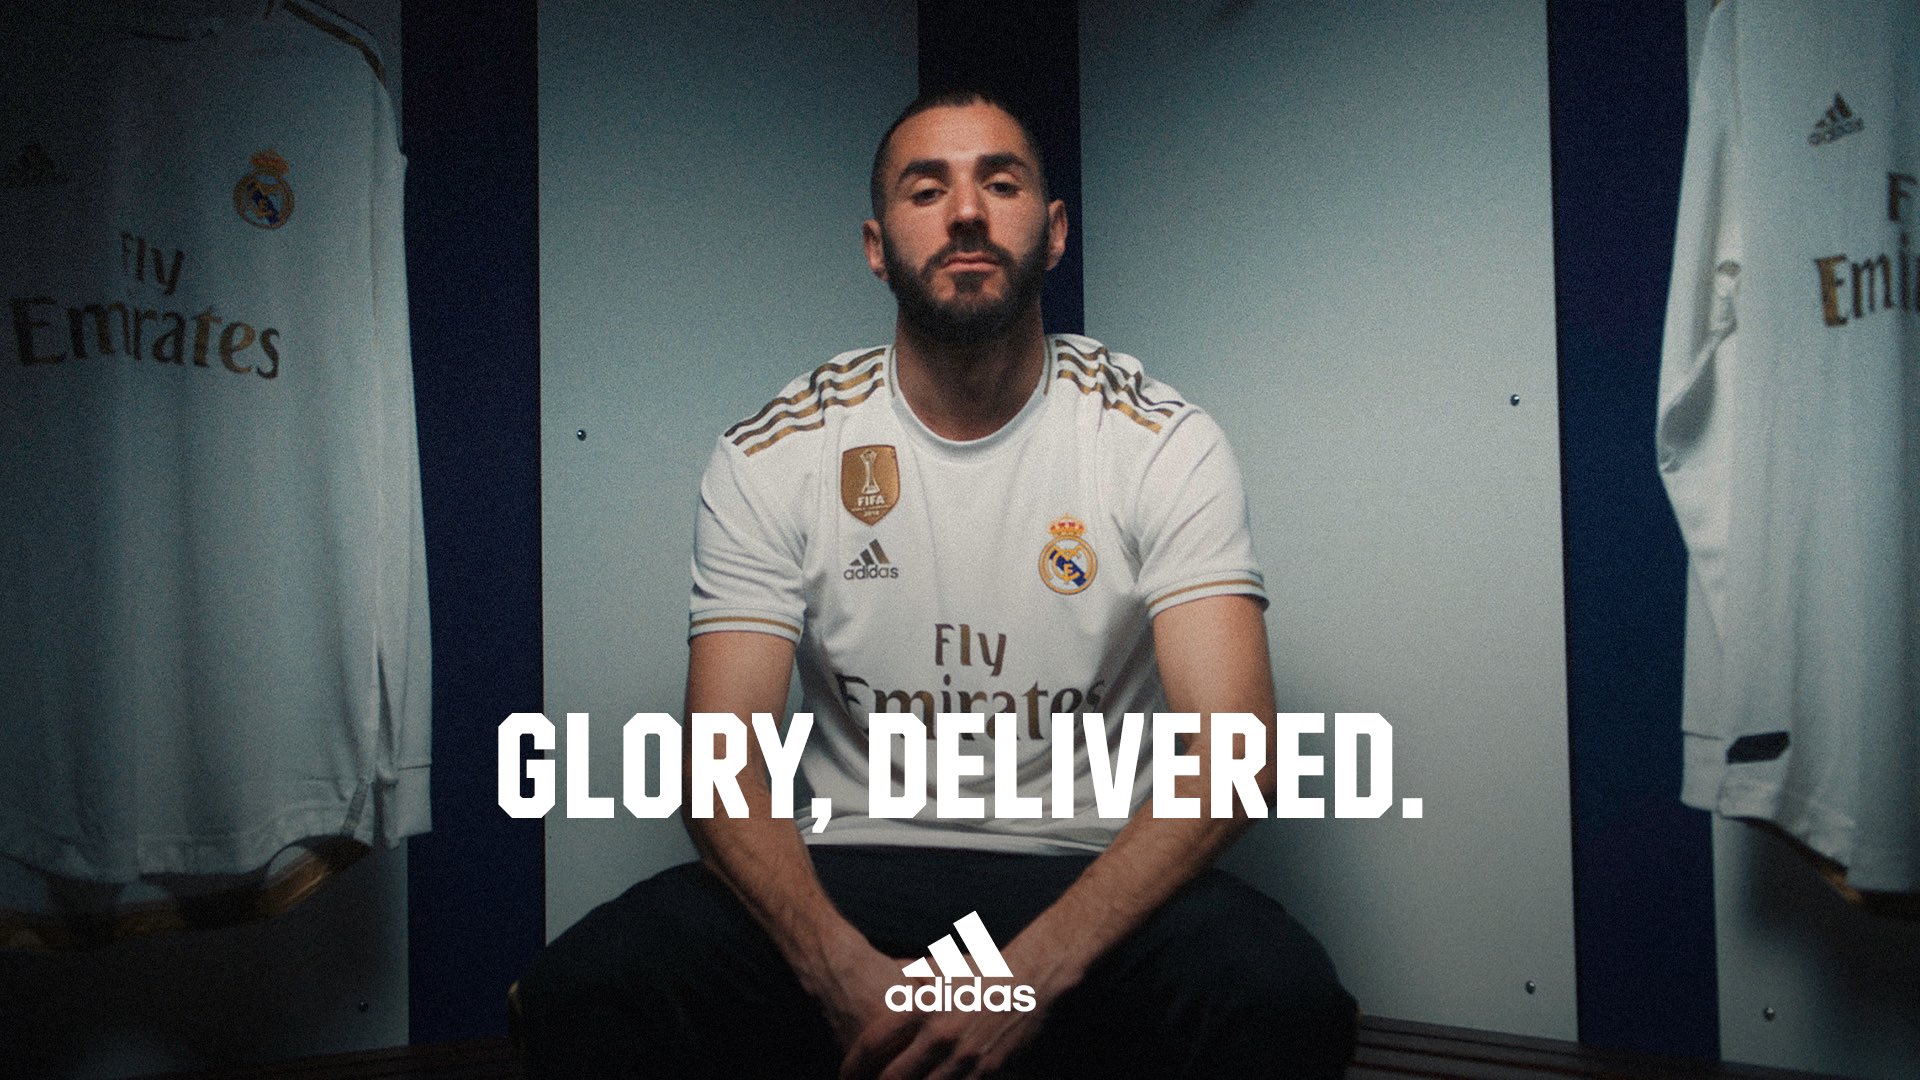 adidas Football en Twitter: "Glory, delivered. 🏆 34 and @ RealMadrid. https://t.co/HFo38RhrMM https://t.co/t4TwOiIL2l" / Twitter